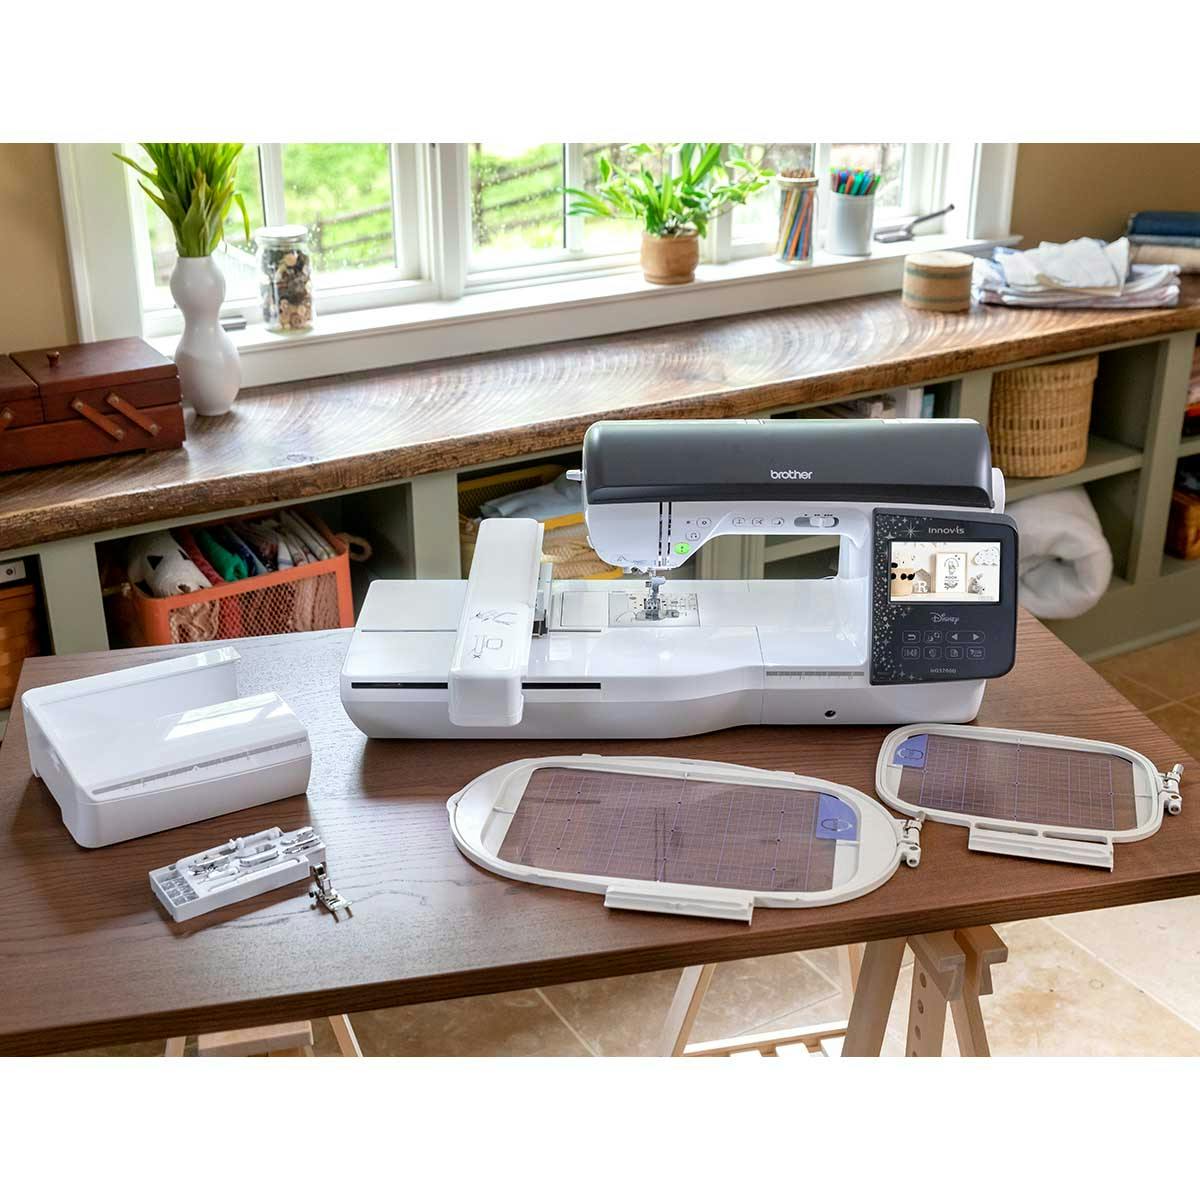 Brother Innov-is NQ3700D Sewing and Embroidery machine hoops